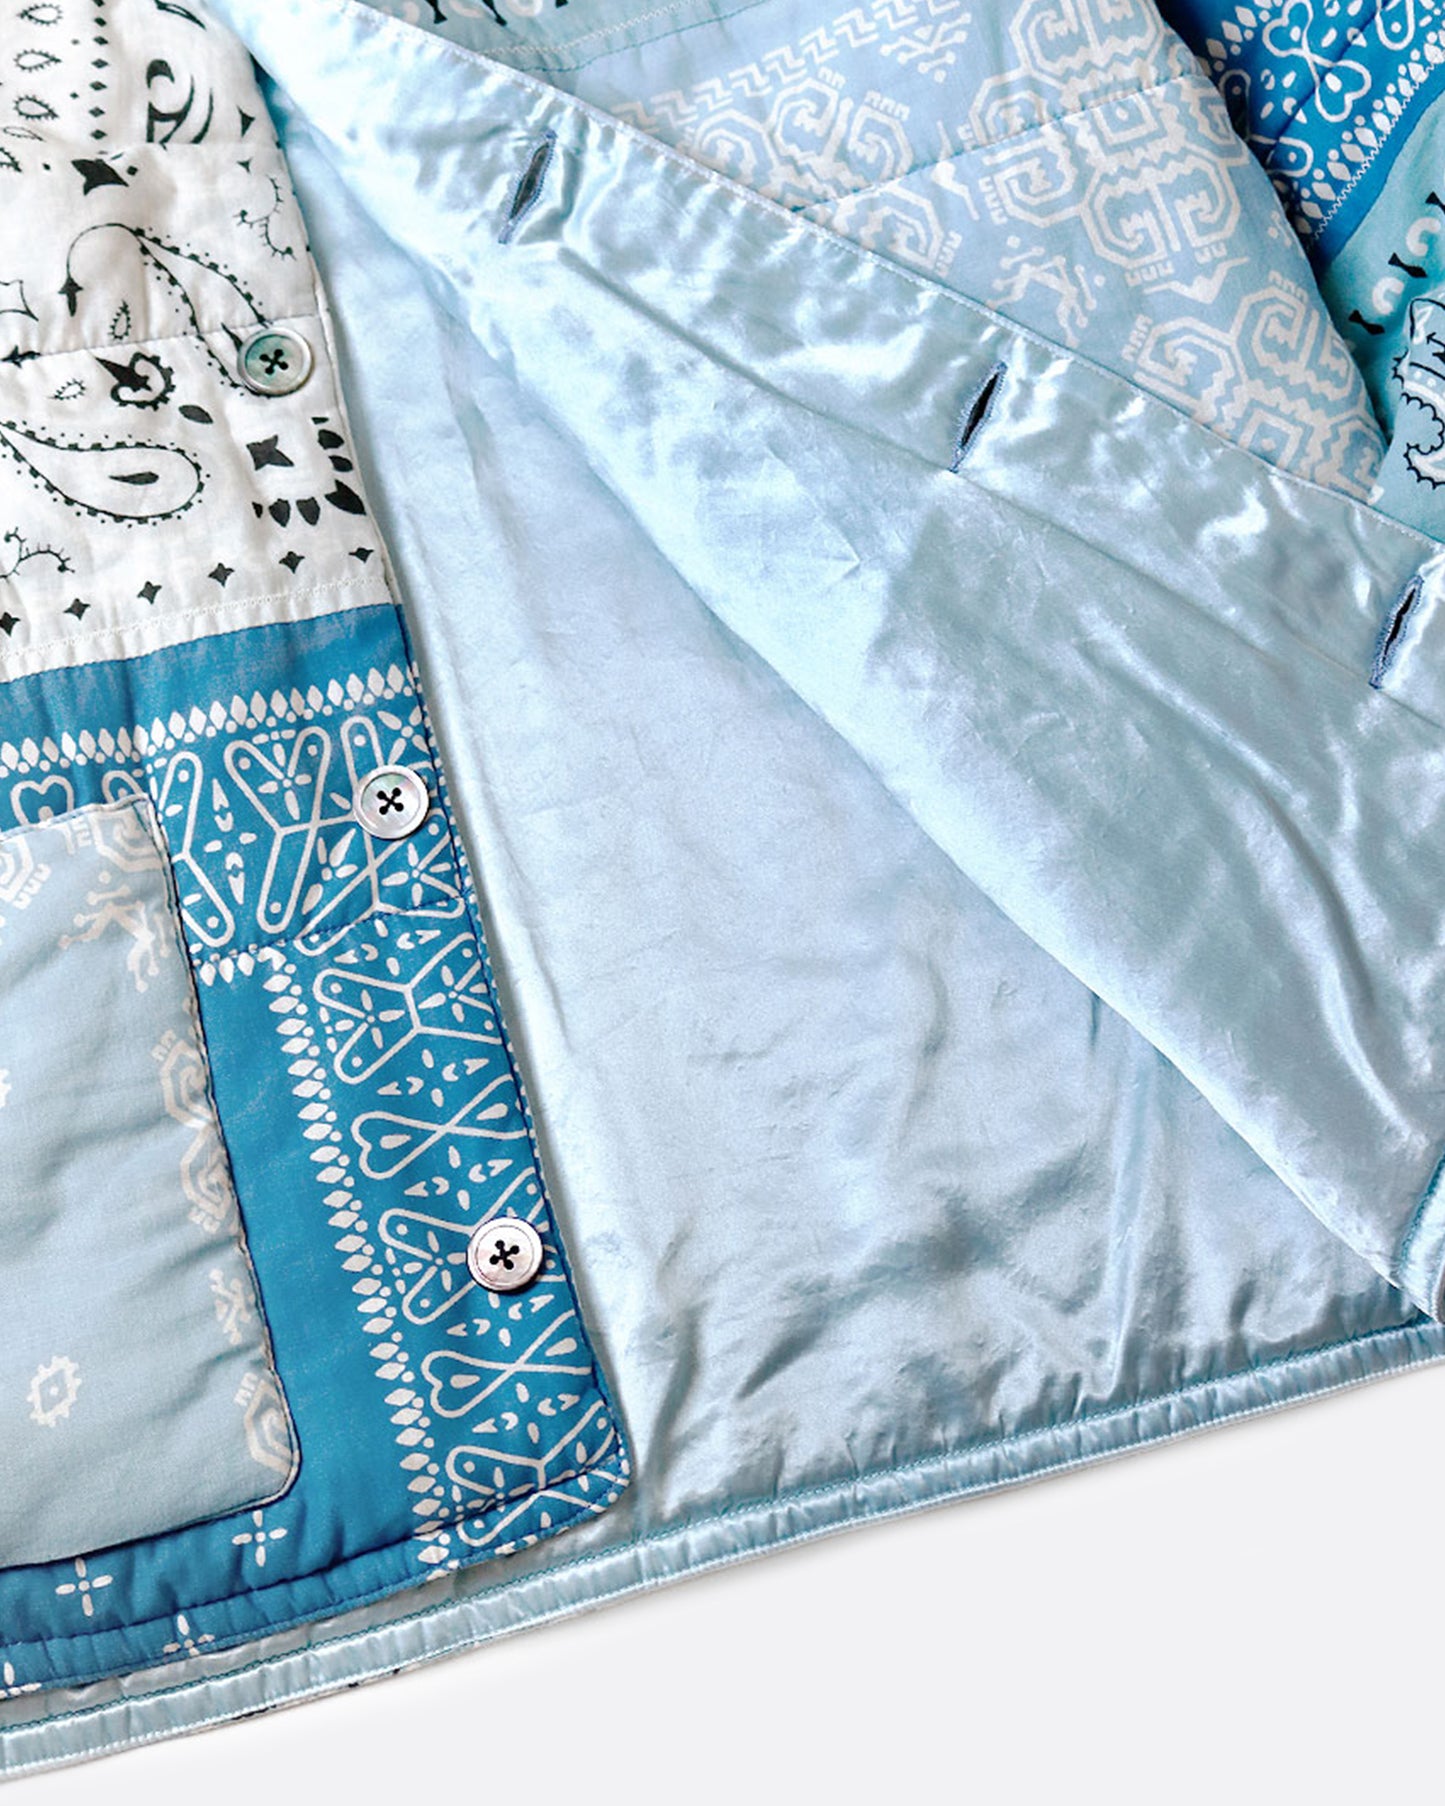 A close up of the lining on the light blue quilted patchwork bandana jacket.